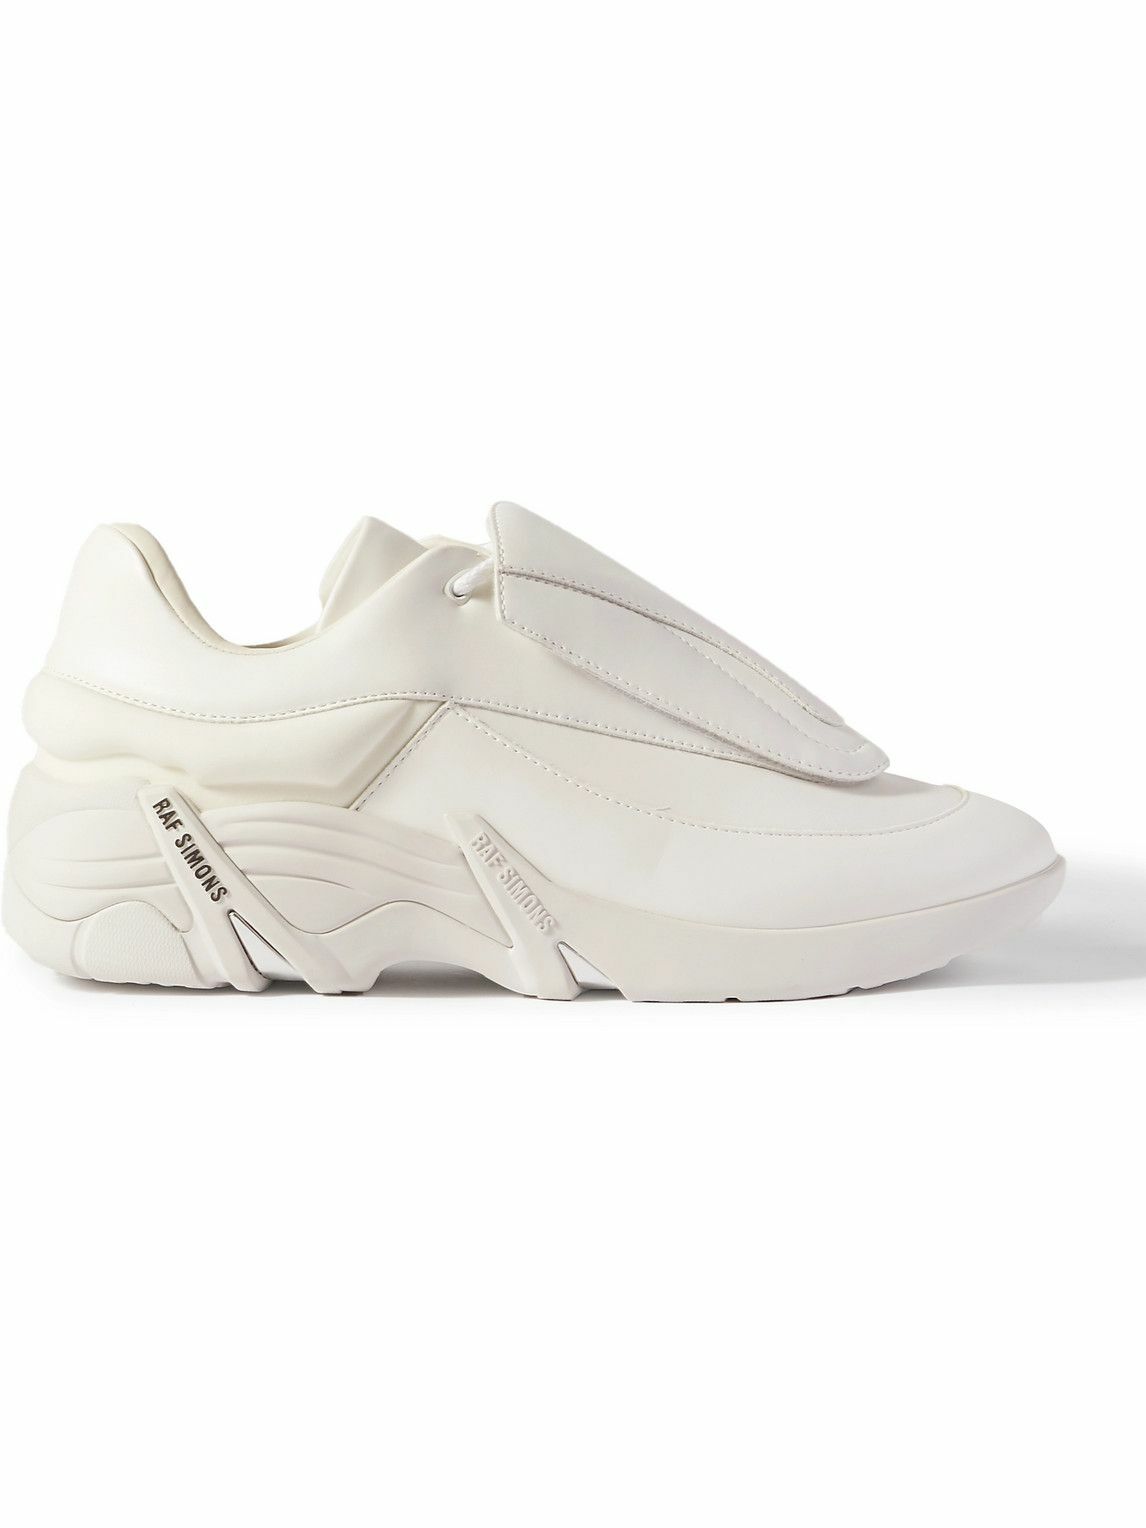 Raf Simons - Antei Faux Leather and Leather Sneakers - White Raf Simons